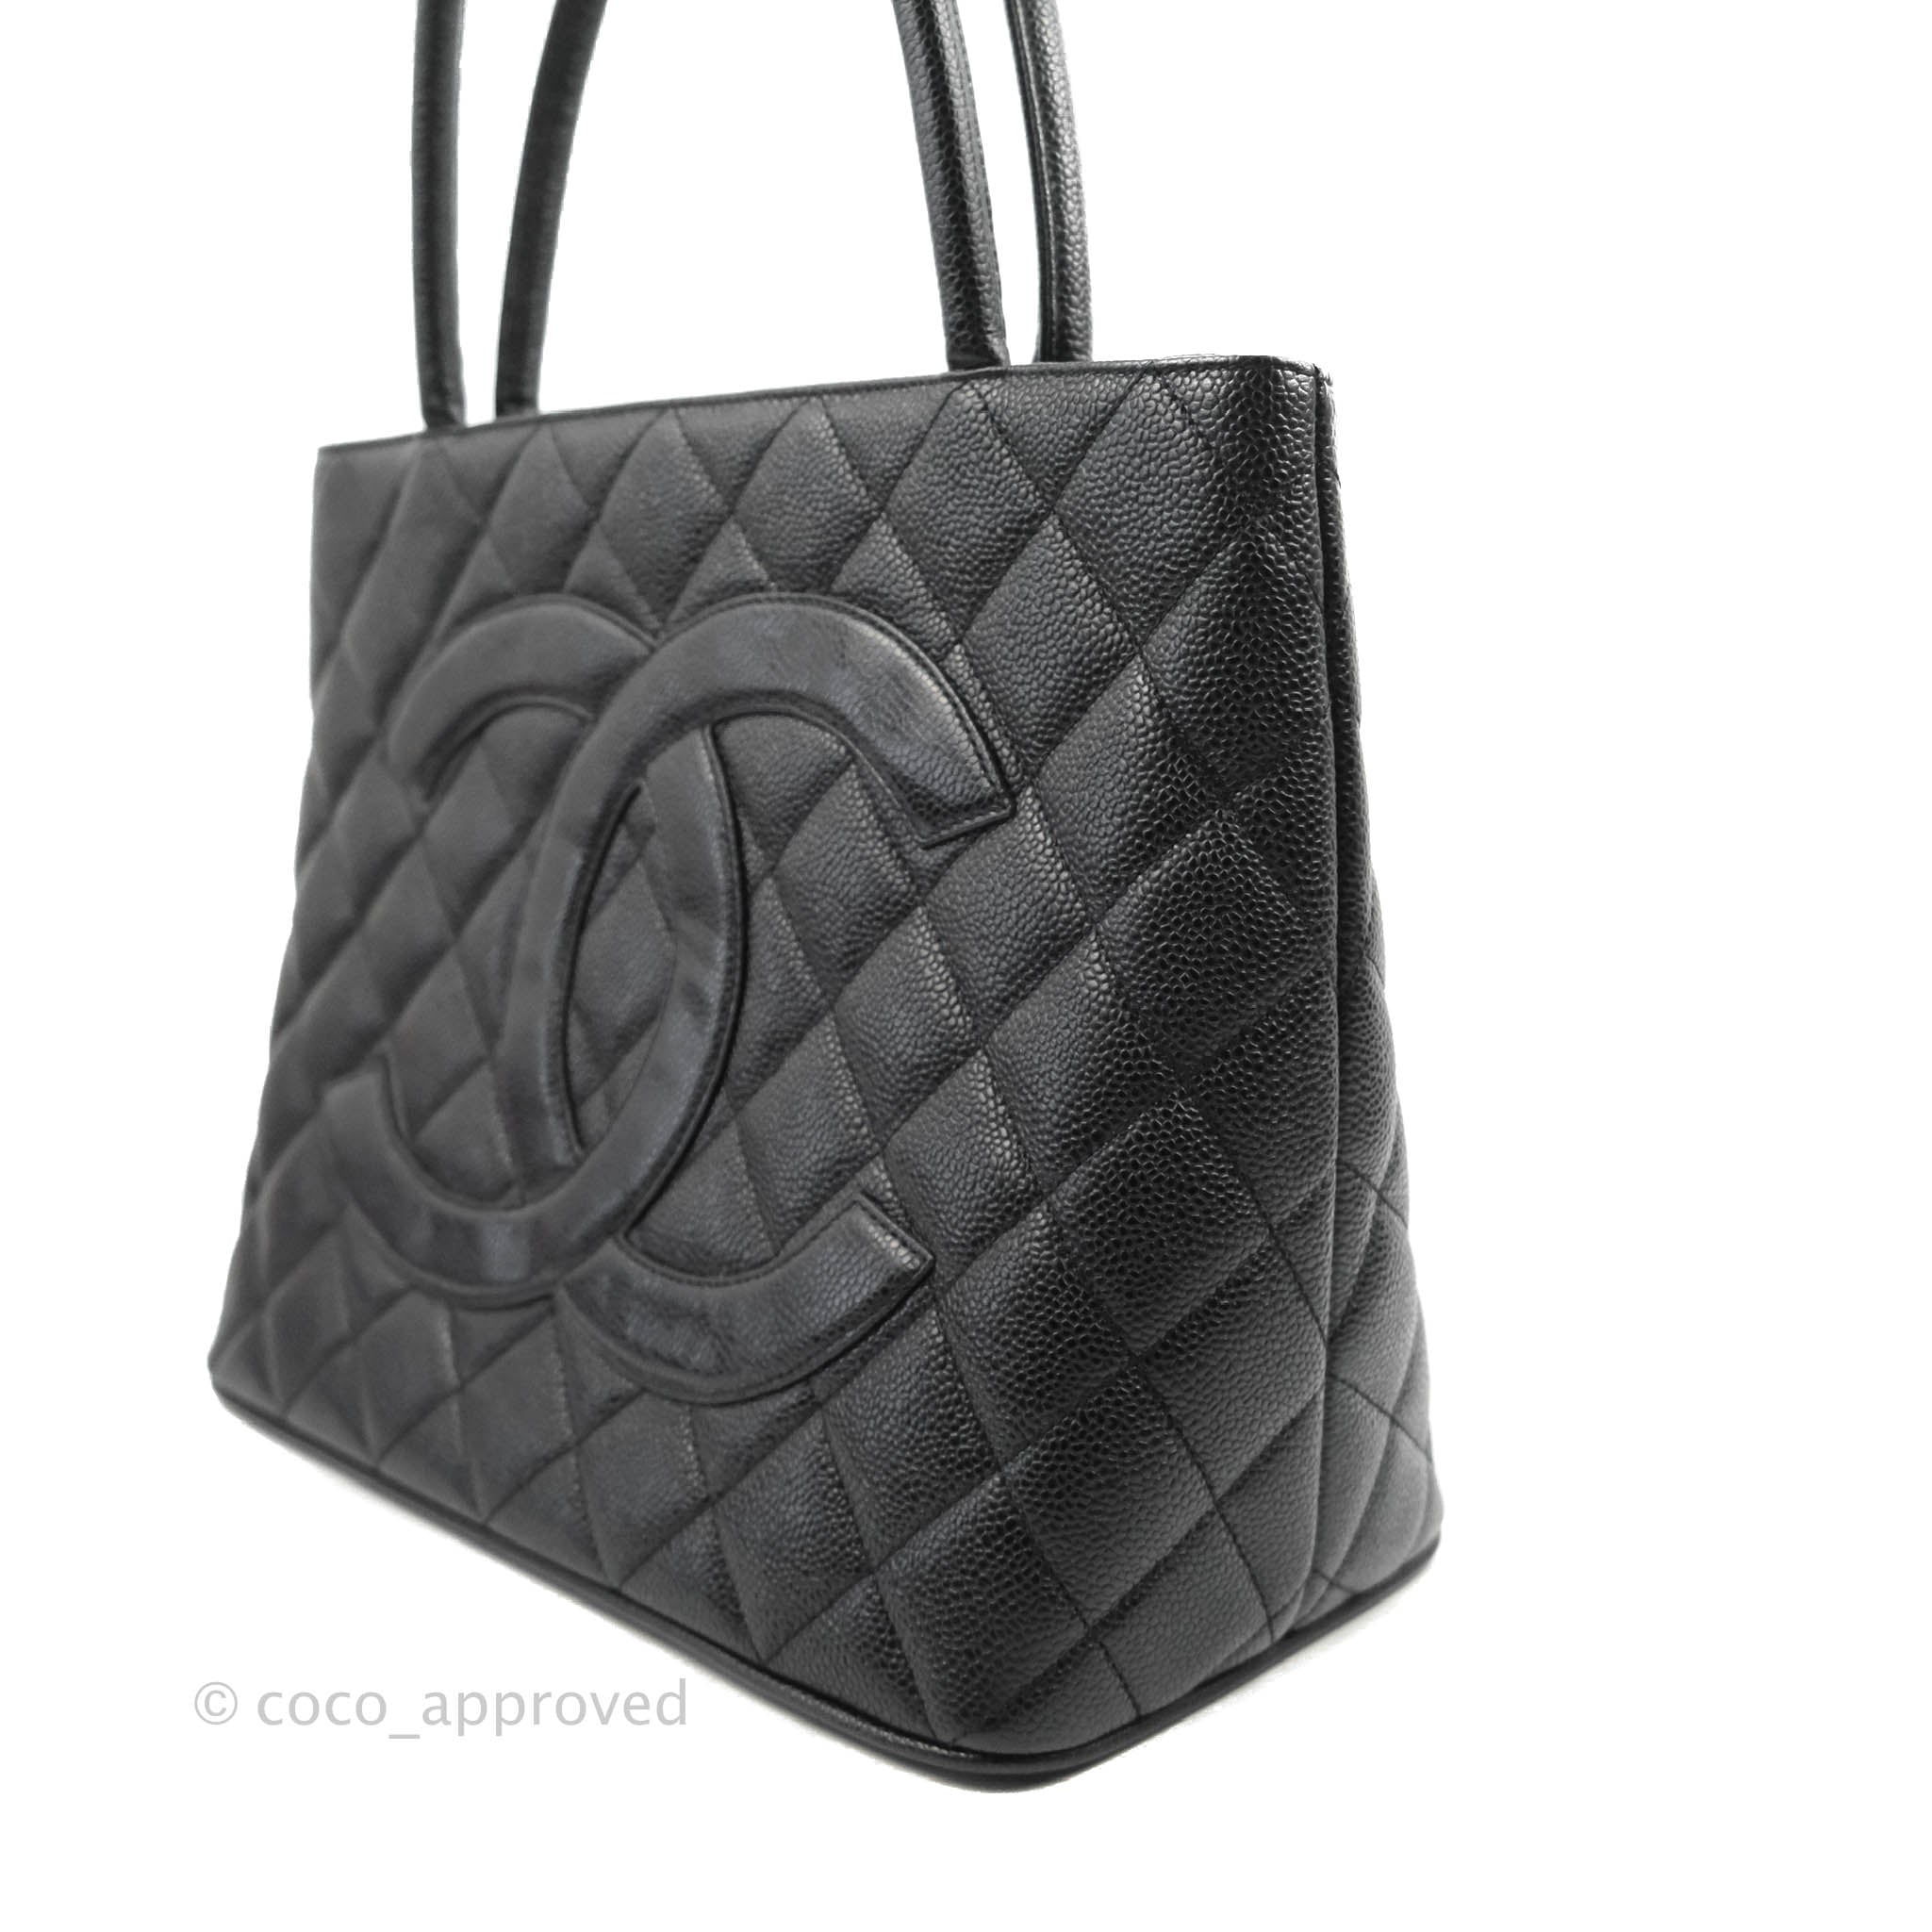 CHANEL Medallion Tote Bags for Women, Authenticity Guaranteed